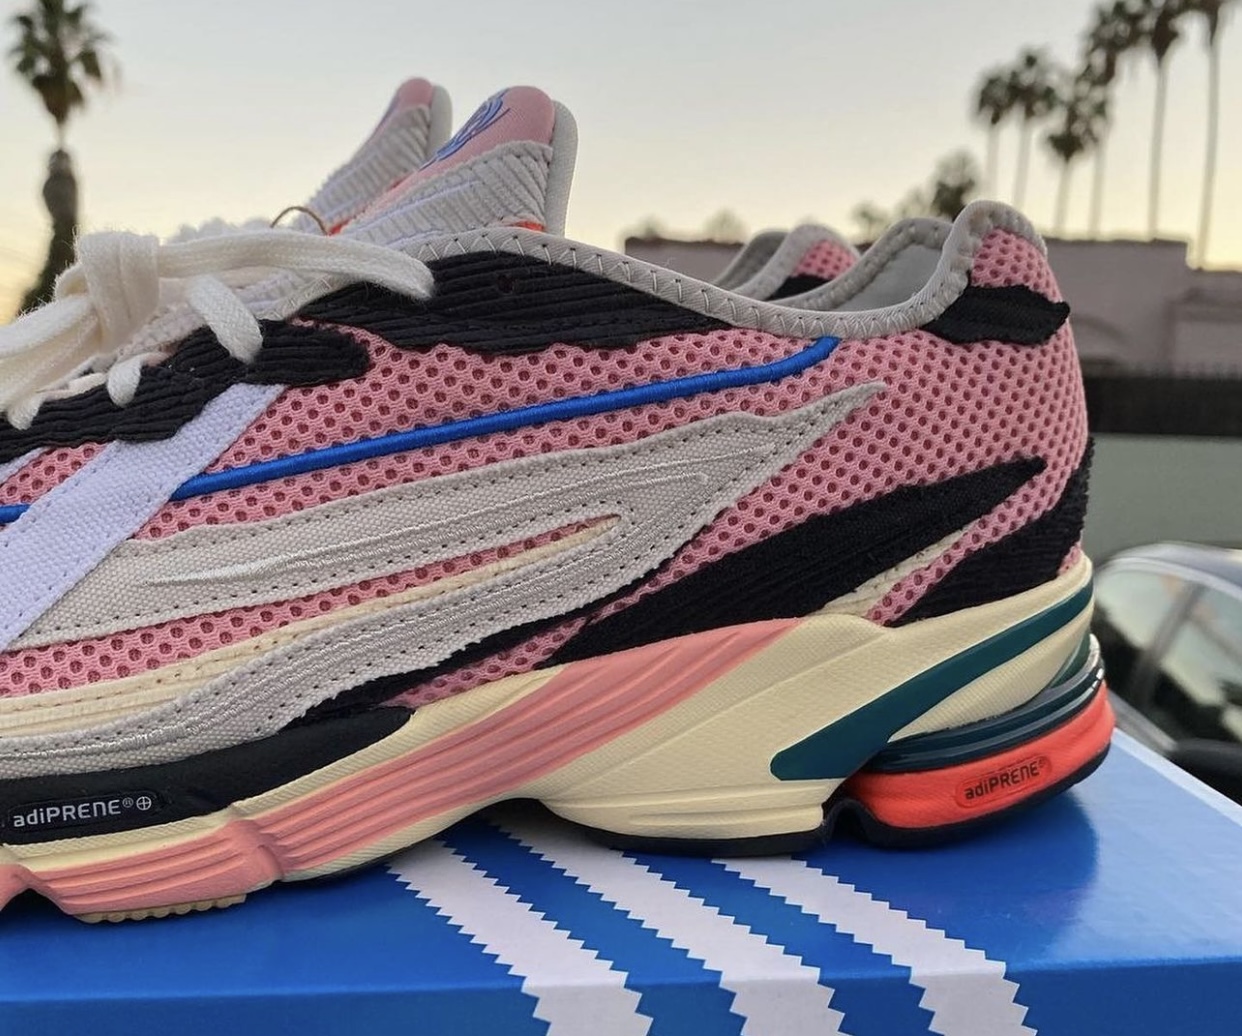 Sean Wotherspoon x adidas Orketro Release Date